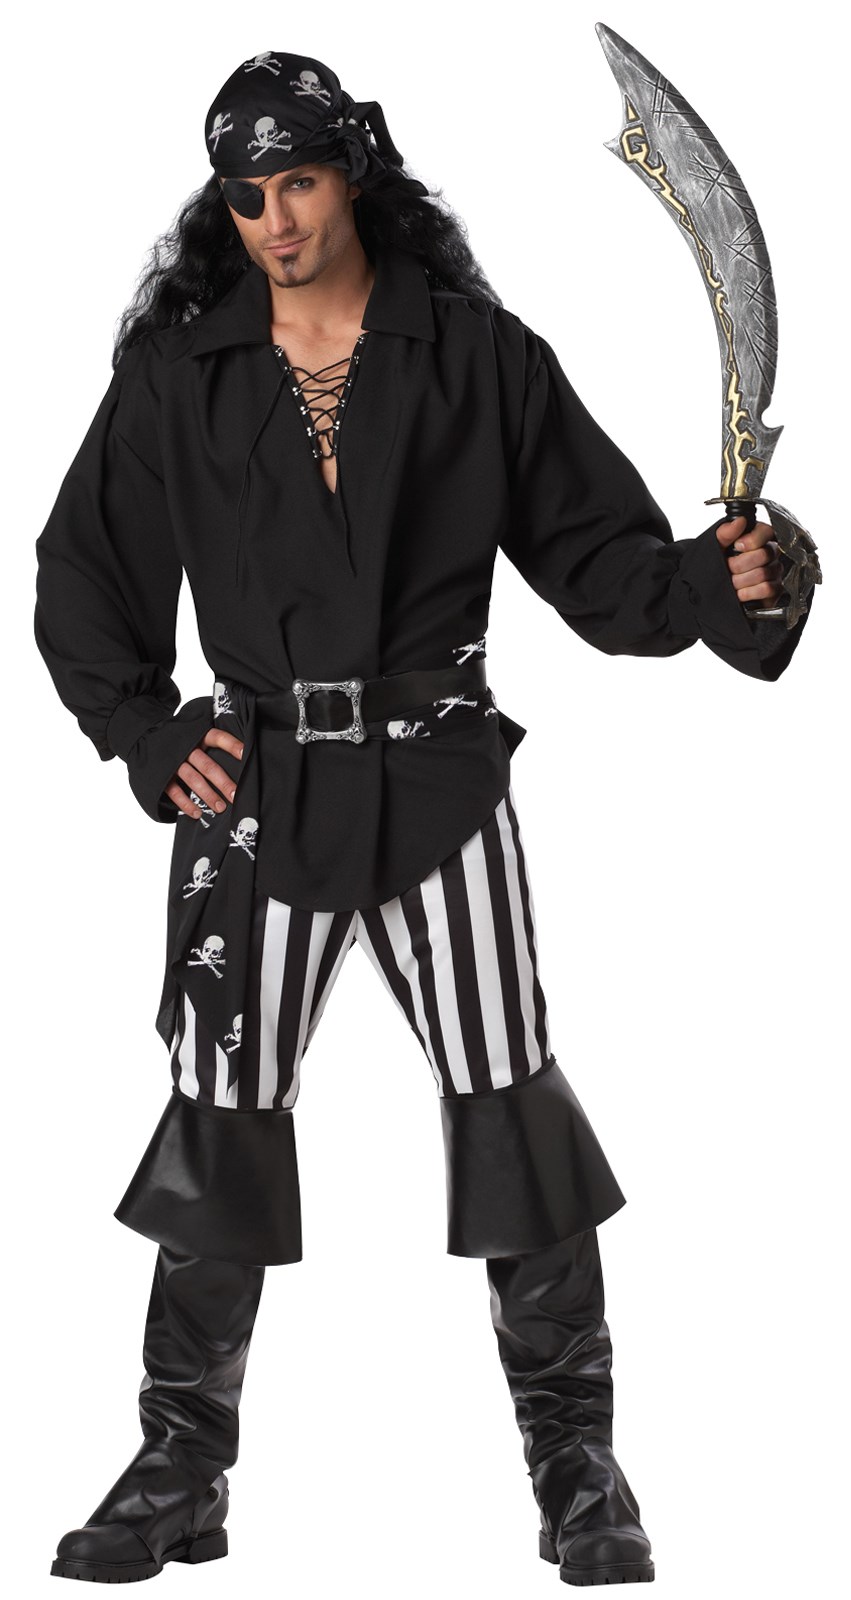 Swashbuckler Adult Costume for the 2022 Costume season.